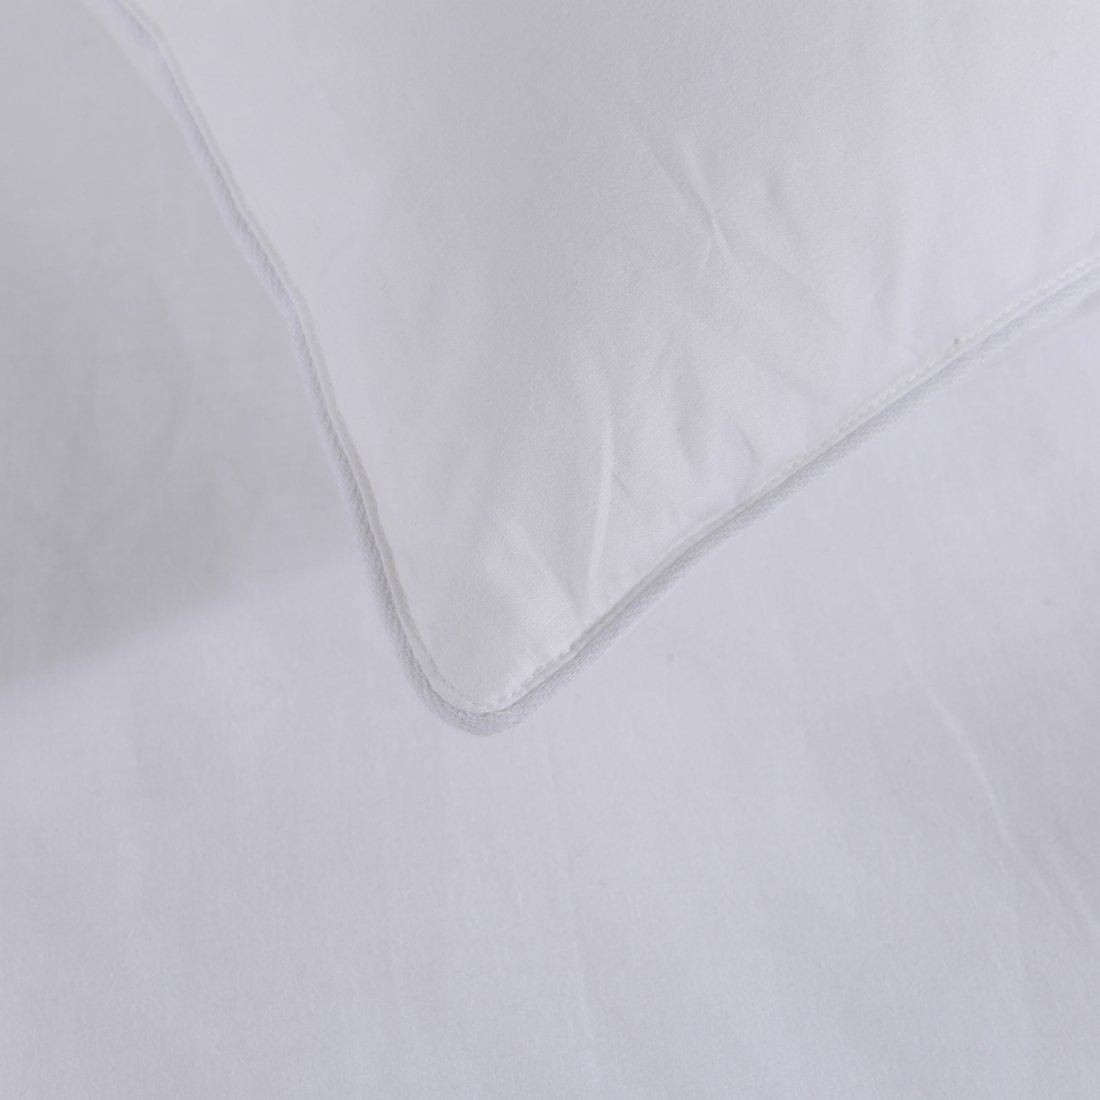 Puredown Natural Memory Foam Goose Feather Pillow, Set of 2, King, White - image 2 of 4